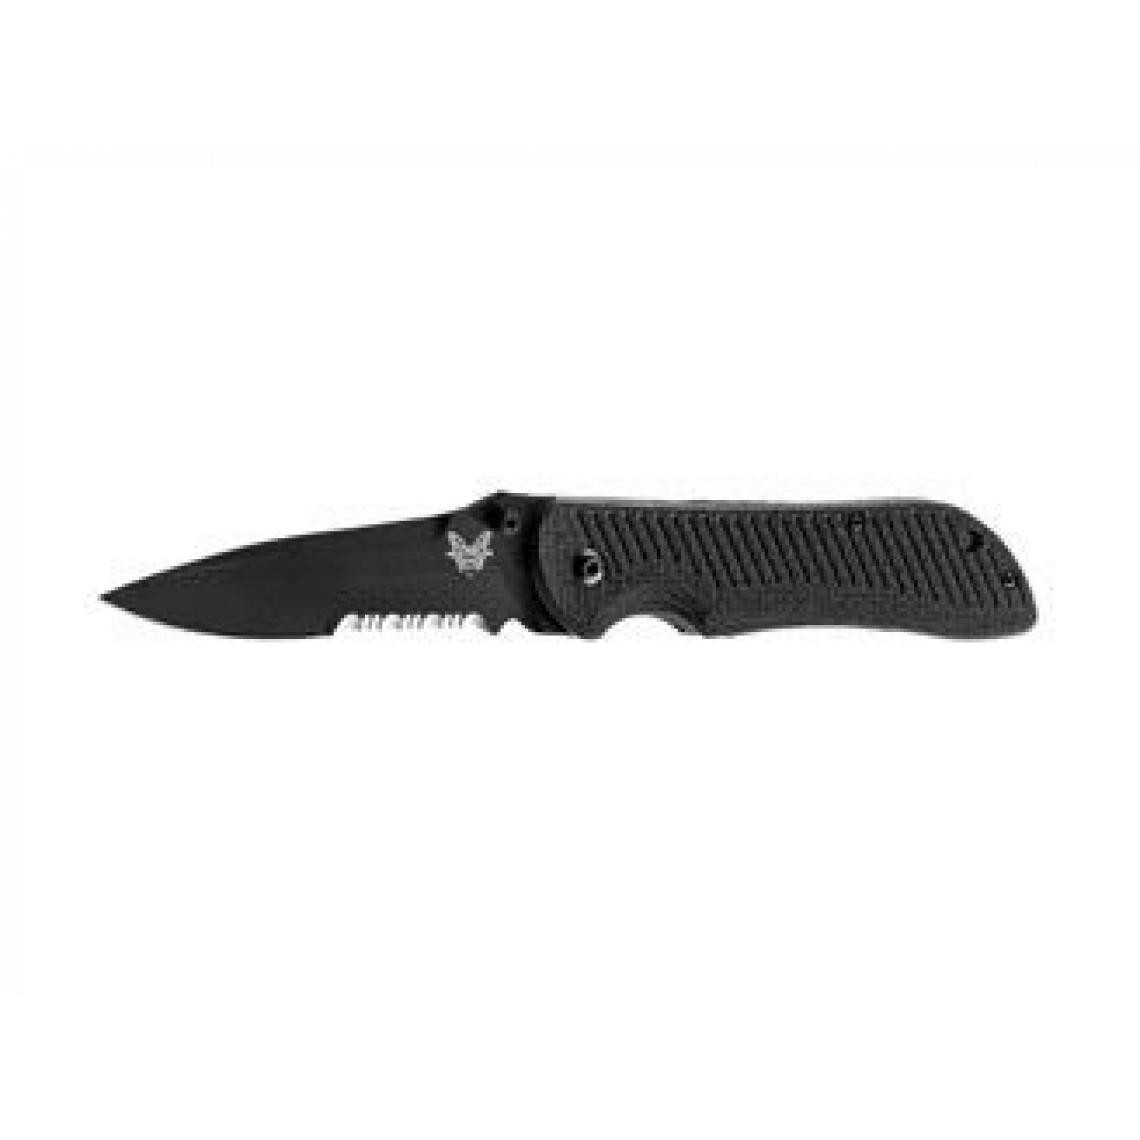 Divers Marques - Benchmade MINI NITROUS STRYKER 907SBKD2 SPEAR BLACK COMBO - Outils de coupe